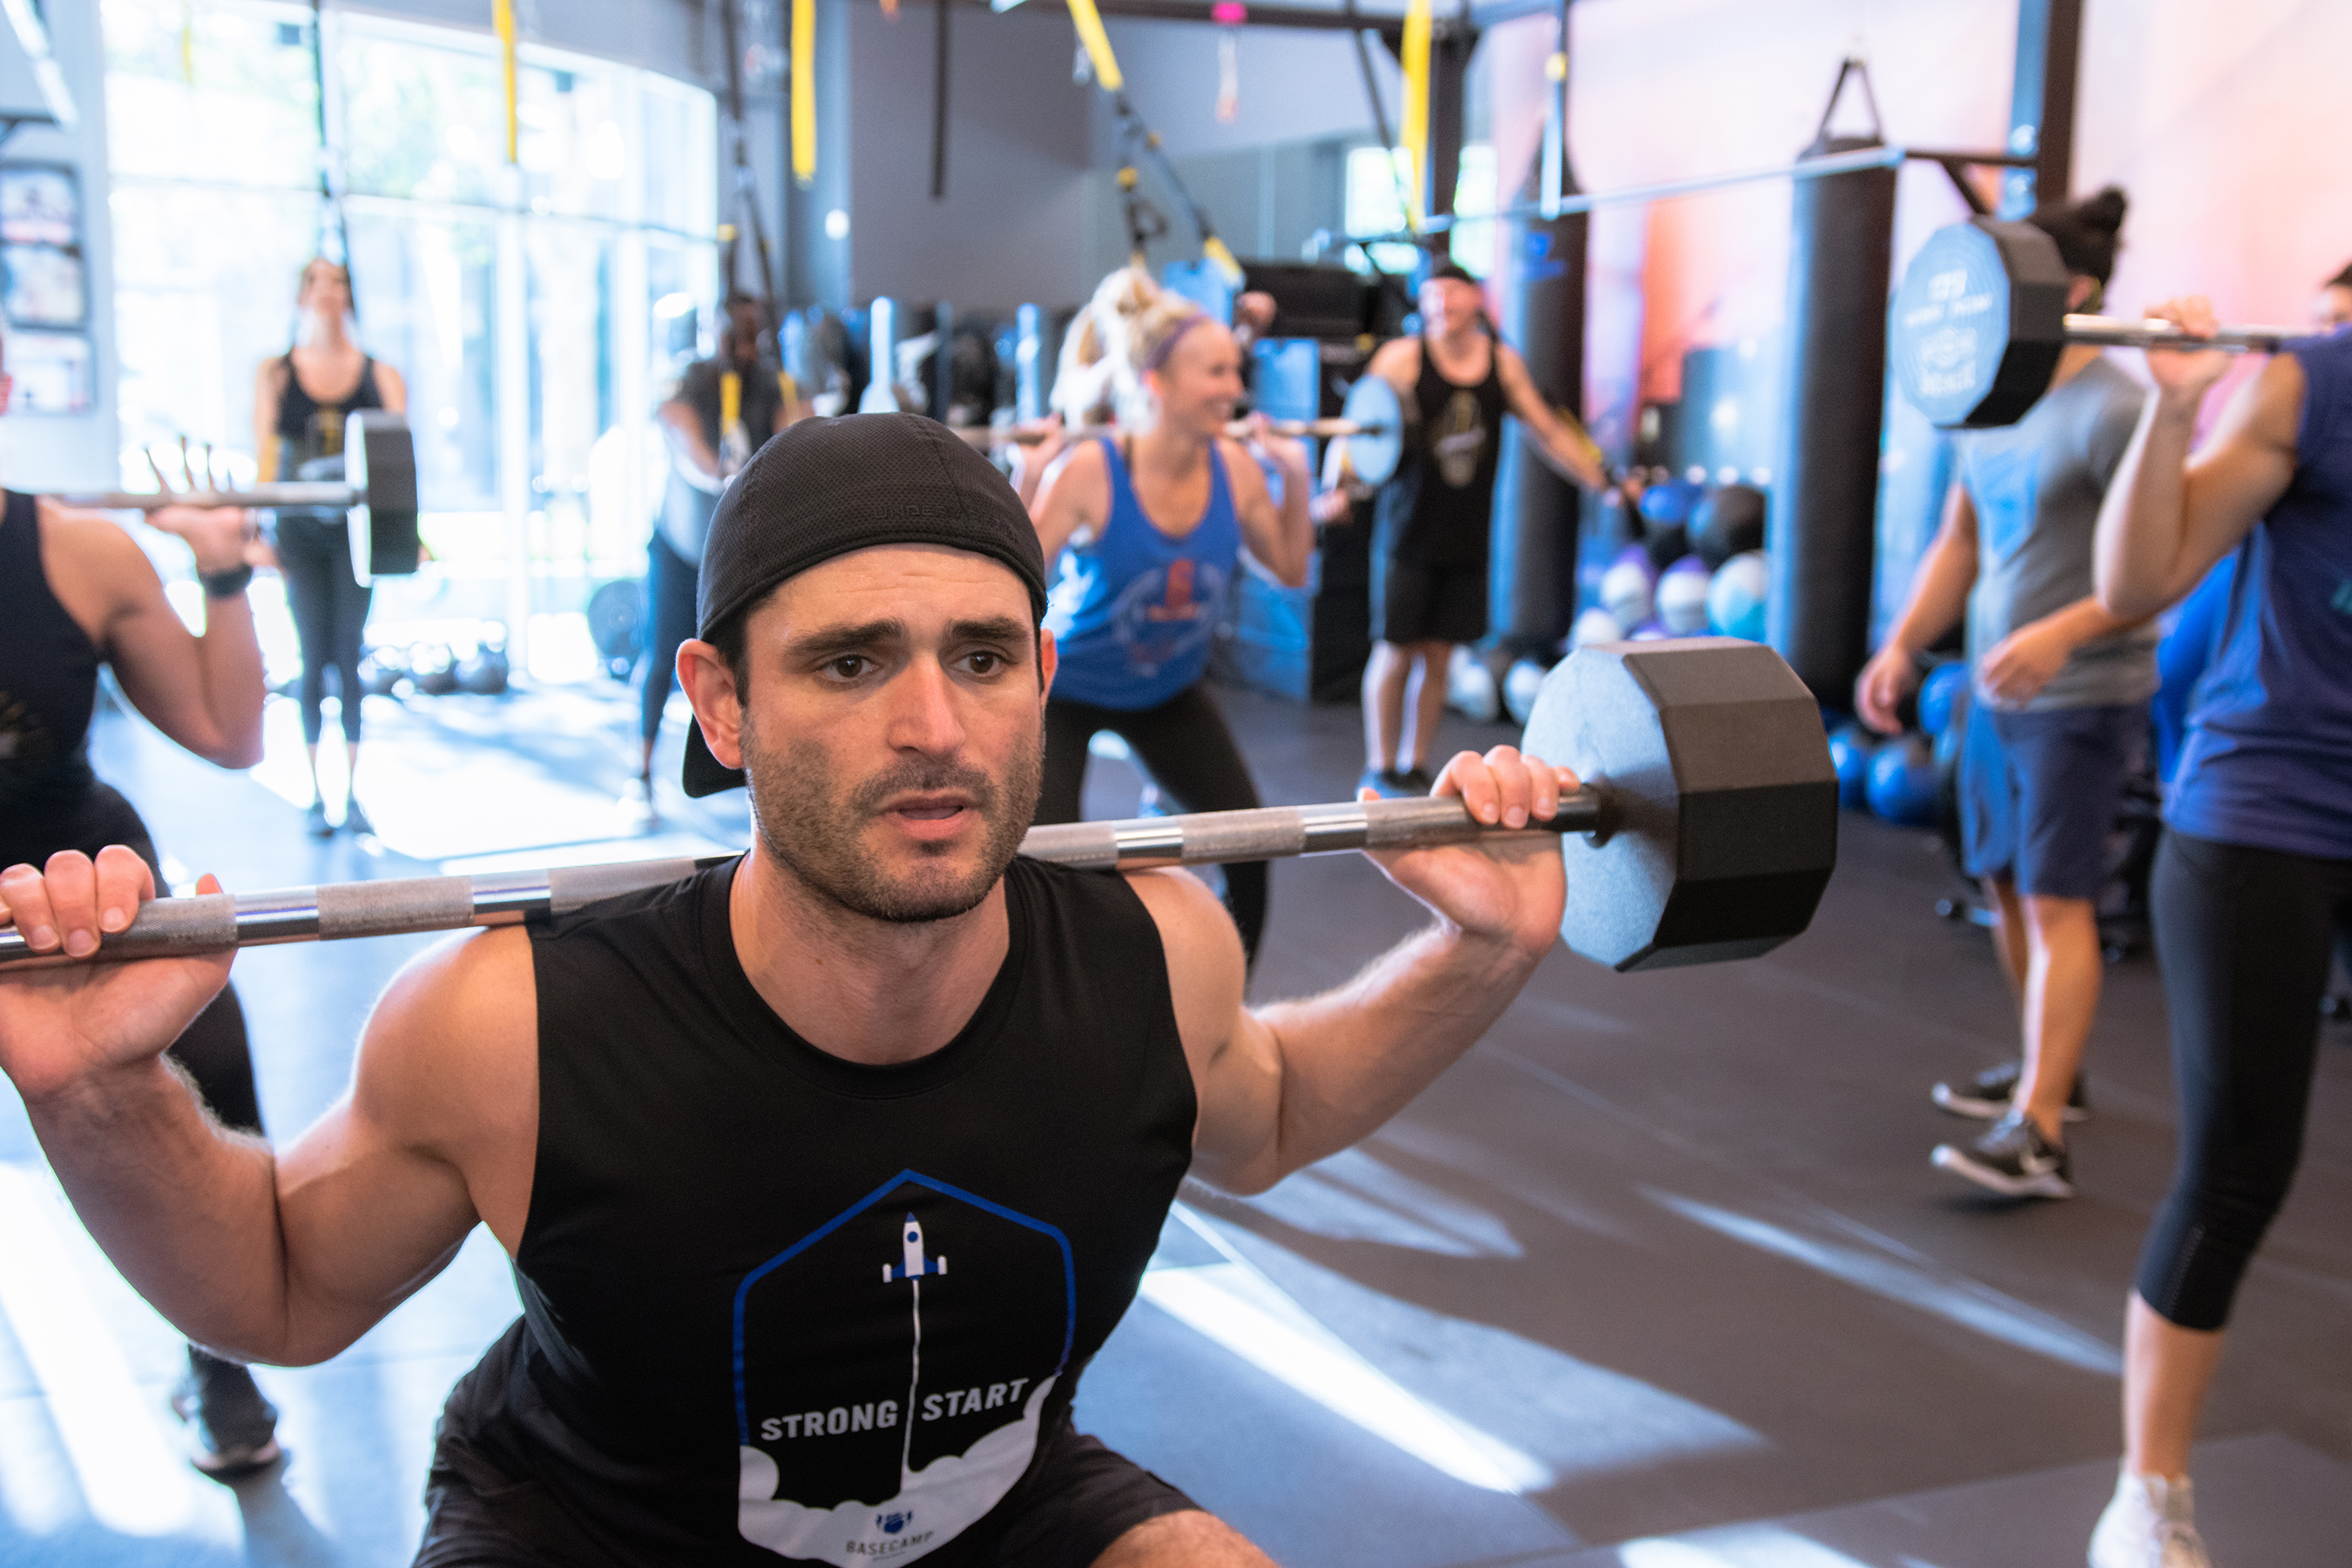 Basecamp’s vision is to help members be the best versions of themselves, improve their self-esteem and connect to a purpose that is greater than fitness.